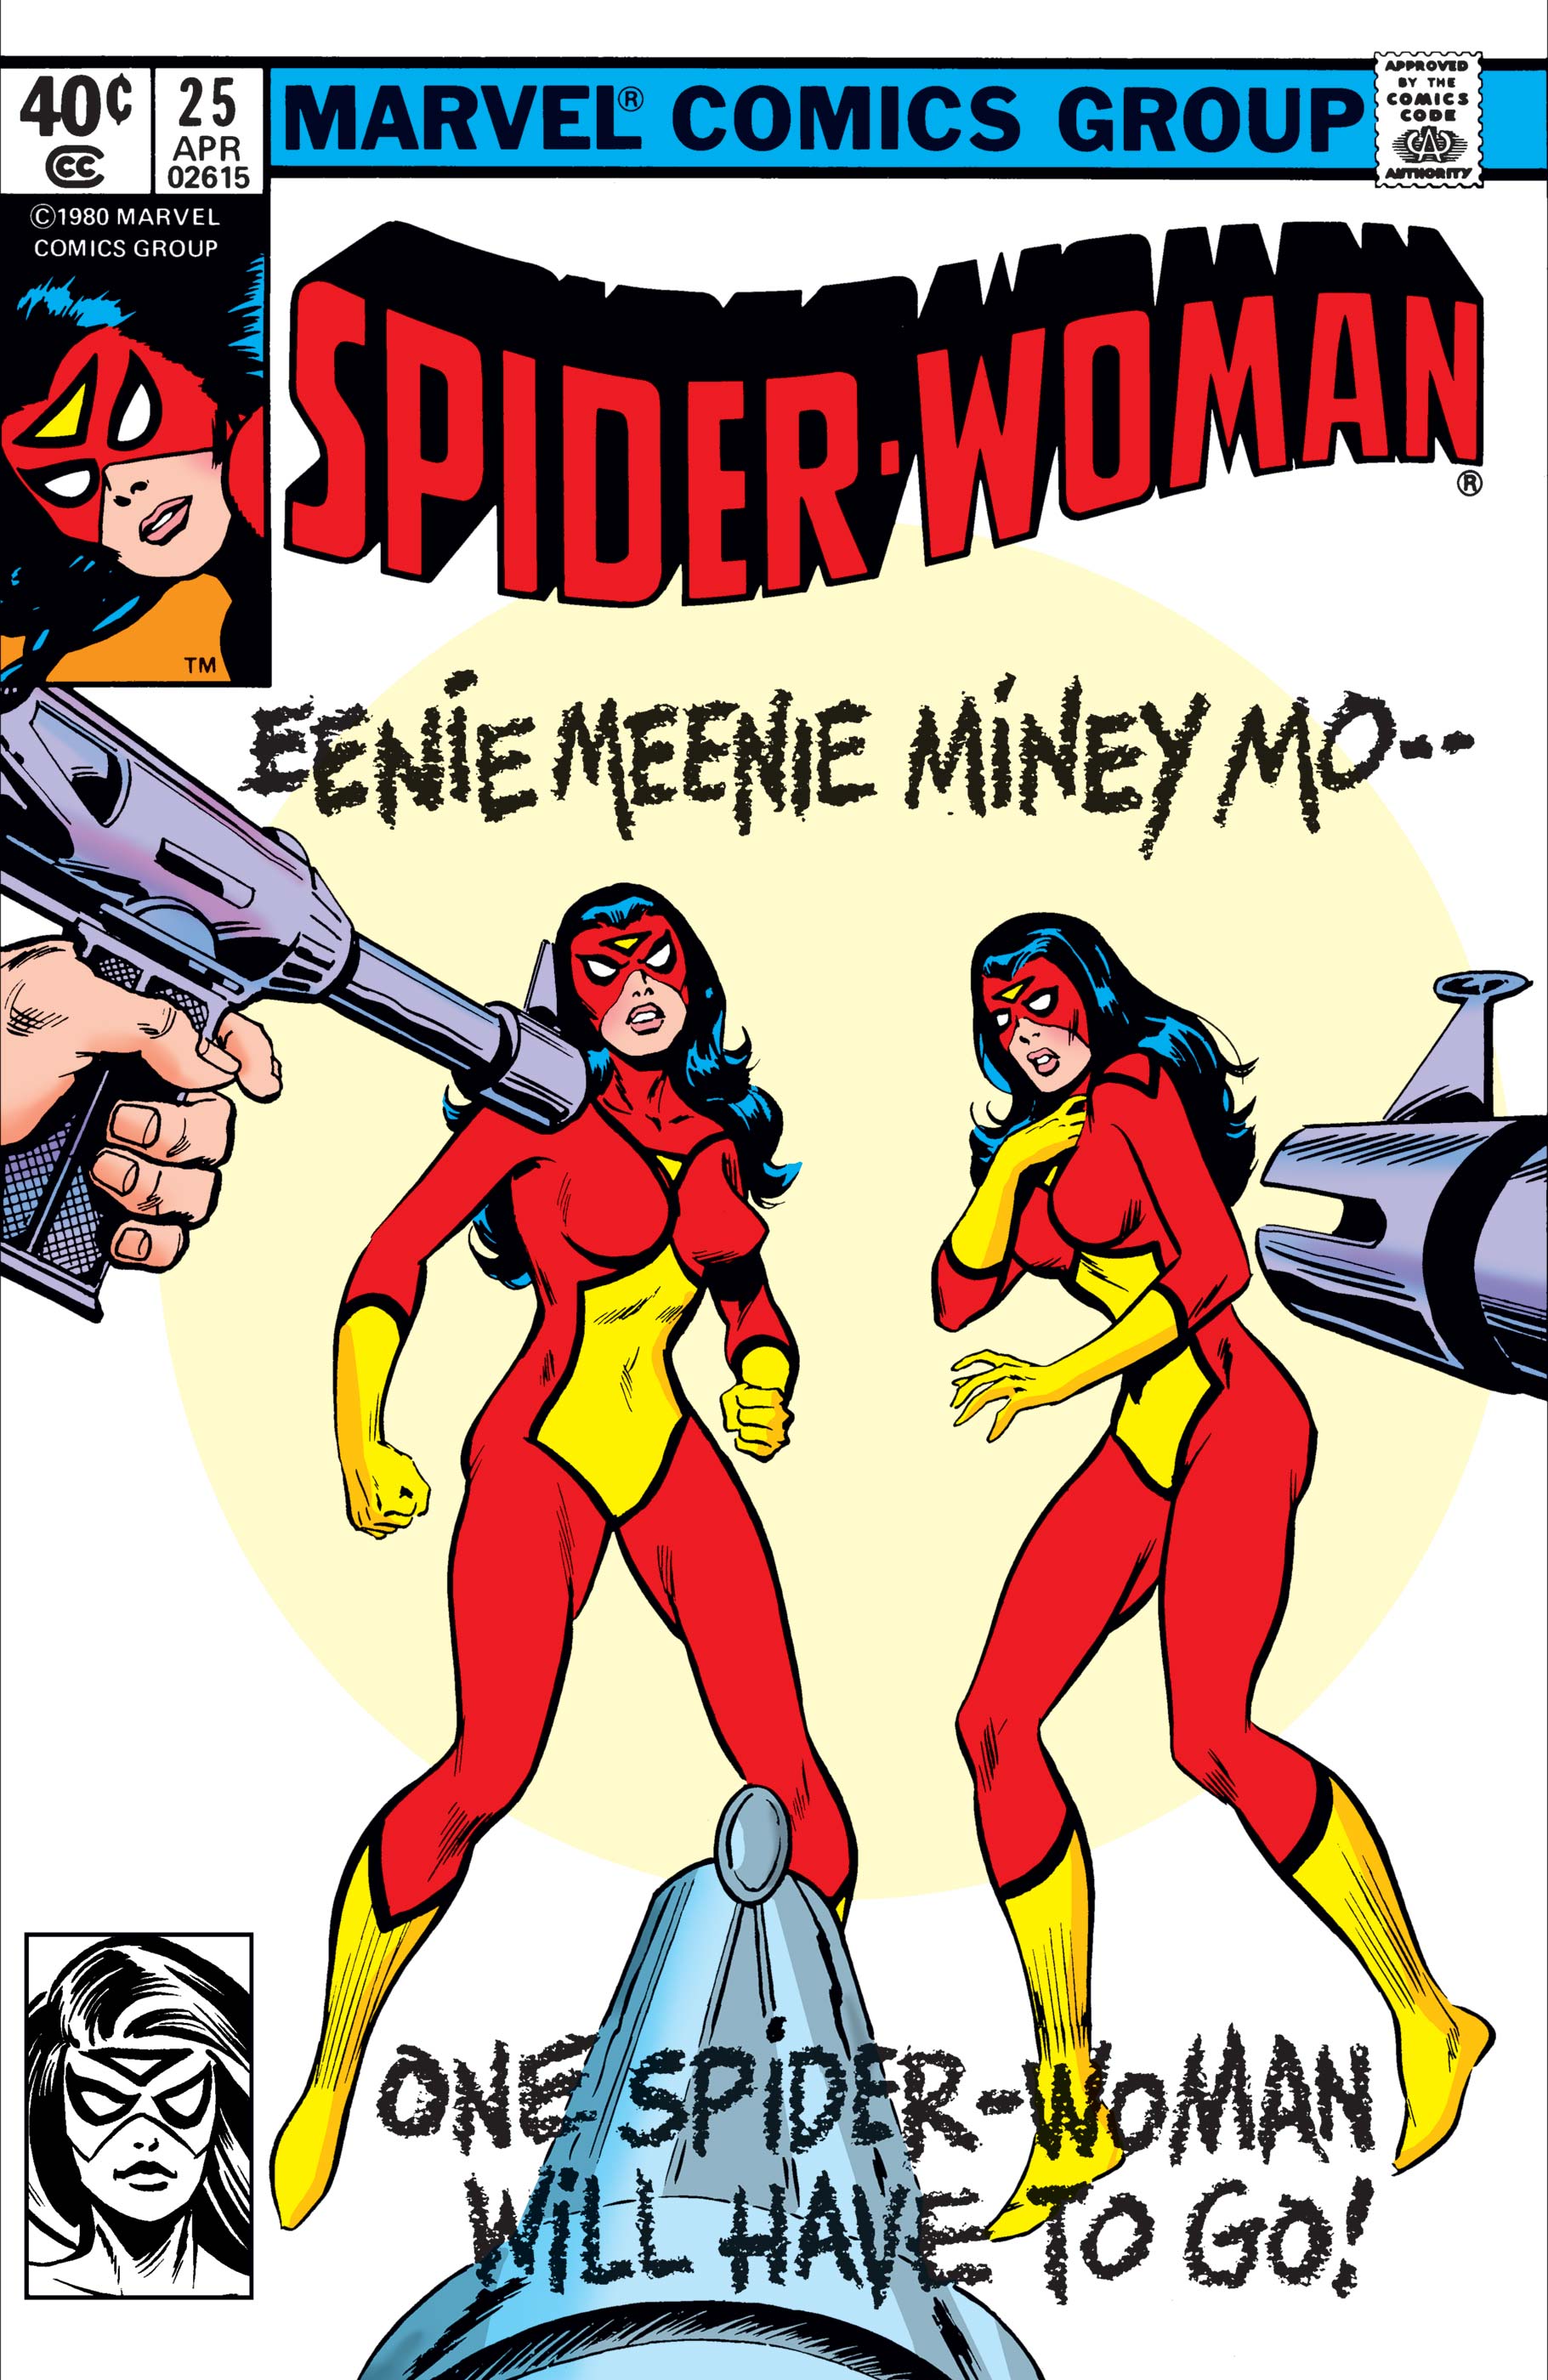 Spider-Woman (1978) #25 | Comic Issues | Marvel